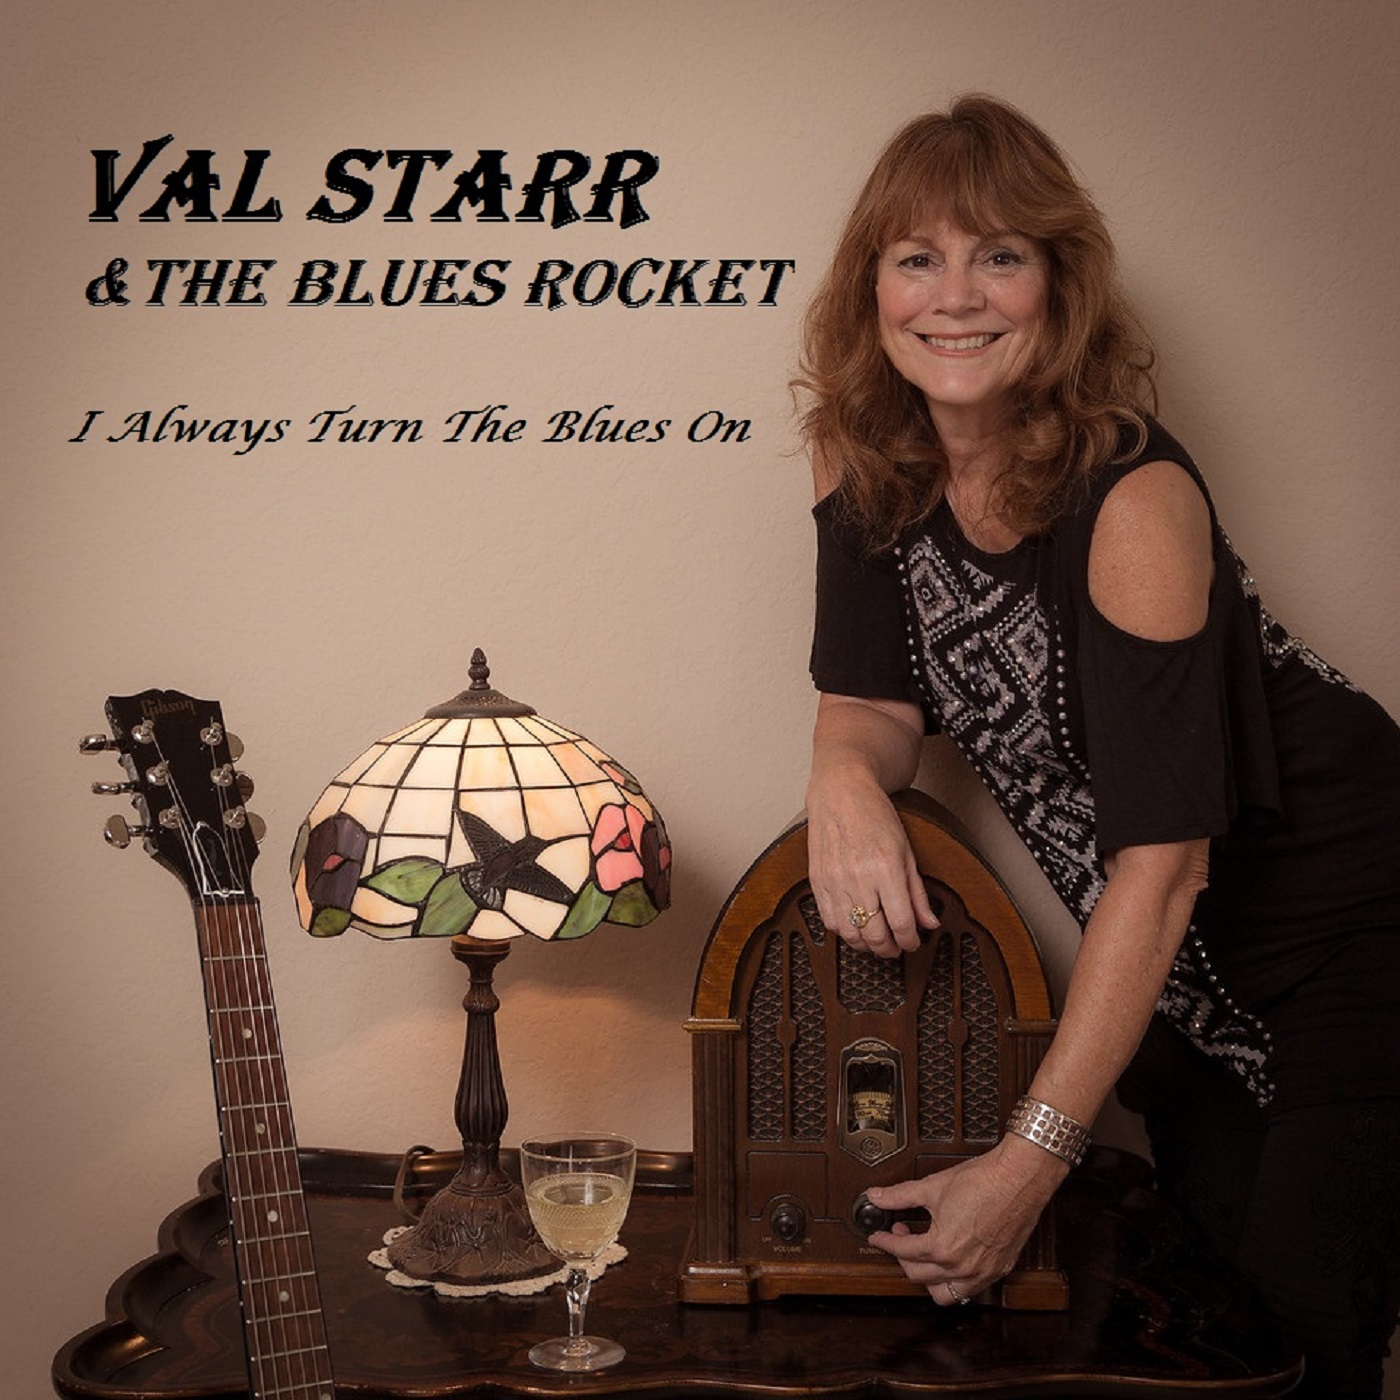 I Always Turn The Blues On - Val Starr & the Blues Rocket, Album Cover